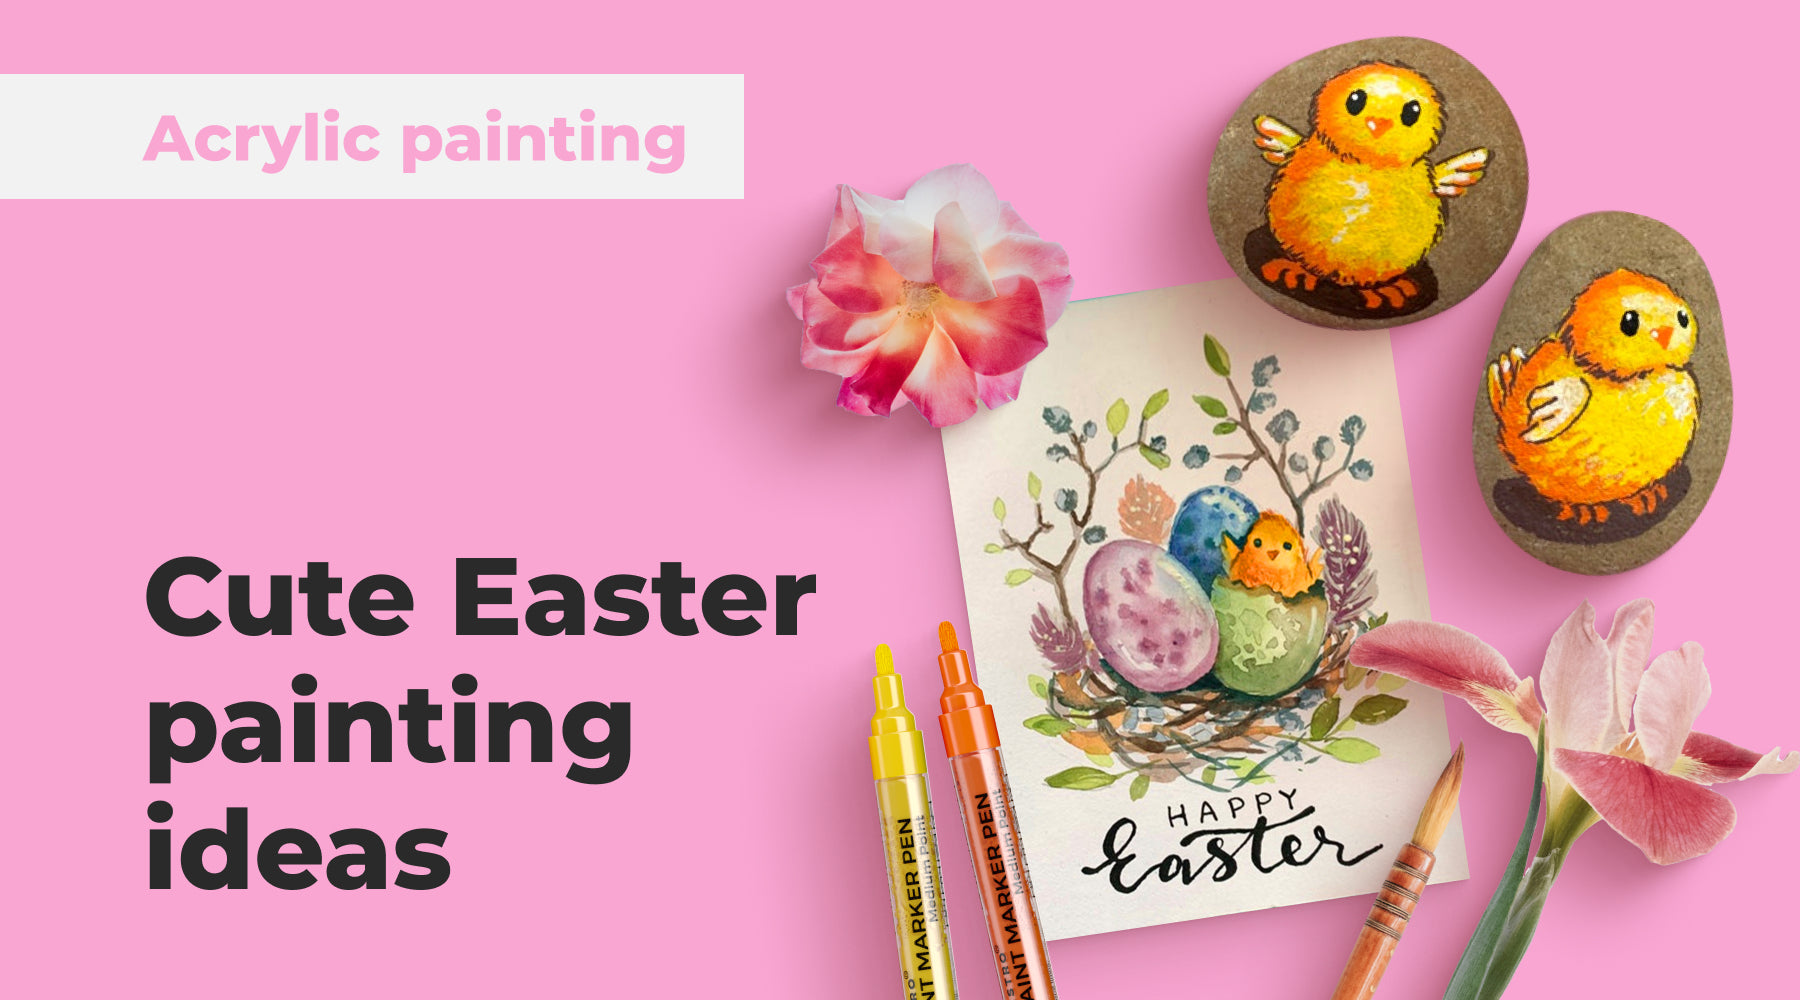 30+ Easy Easter Crafts for Kids - Happiness is Homemade